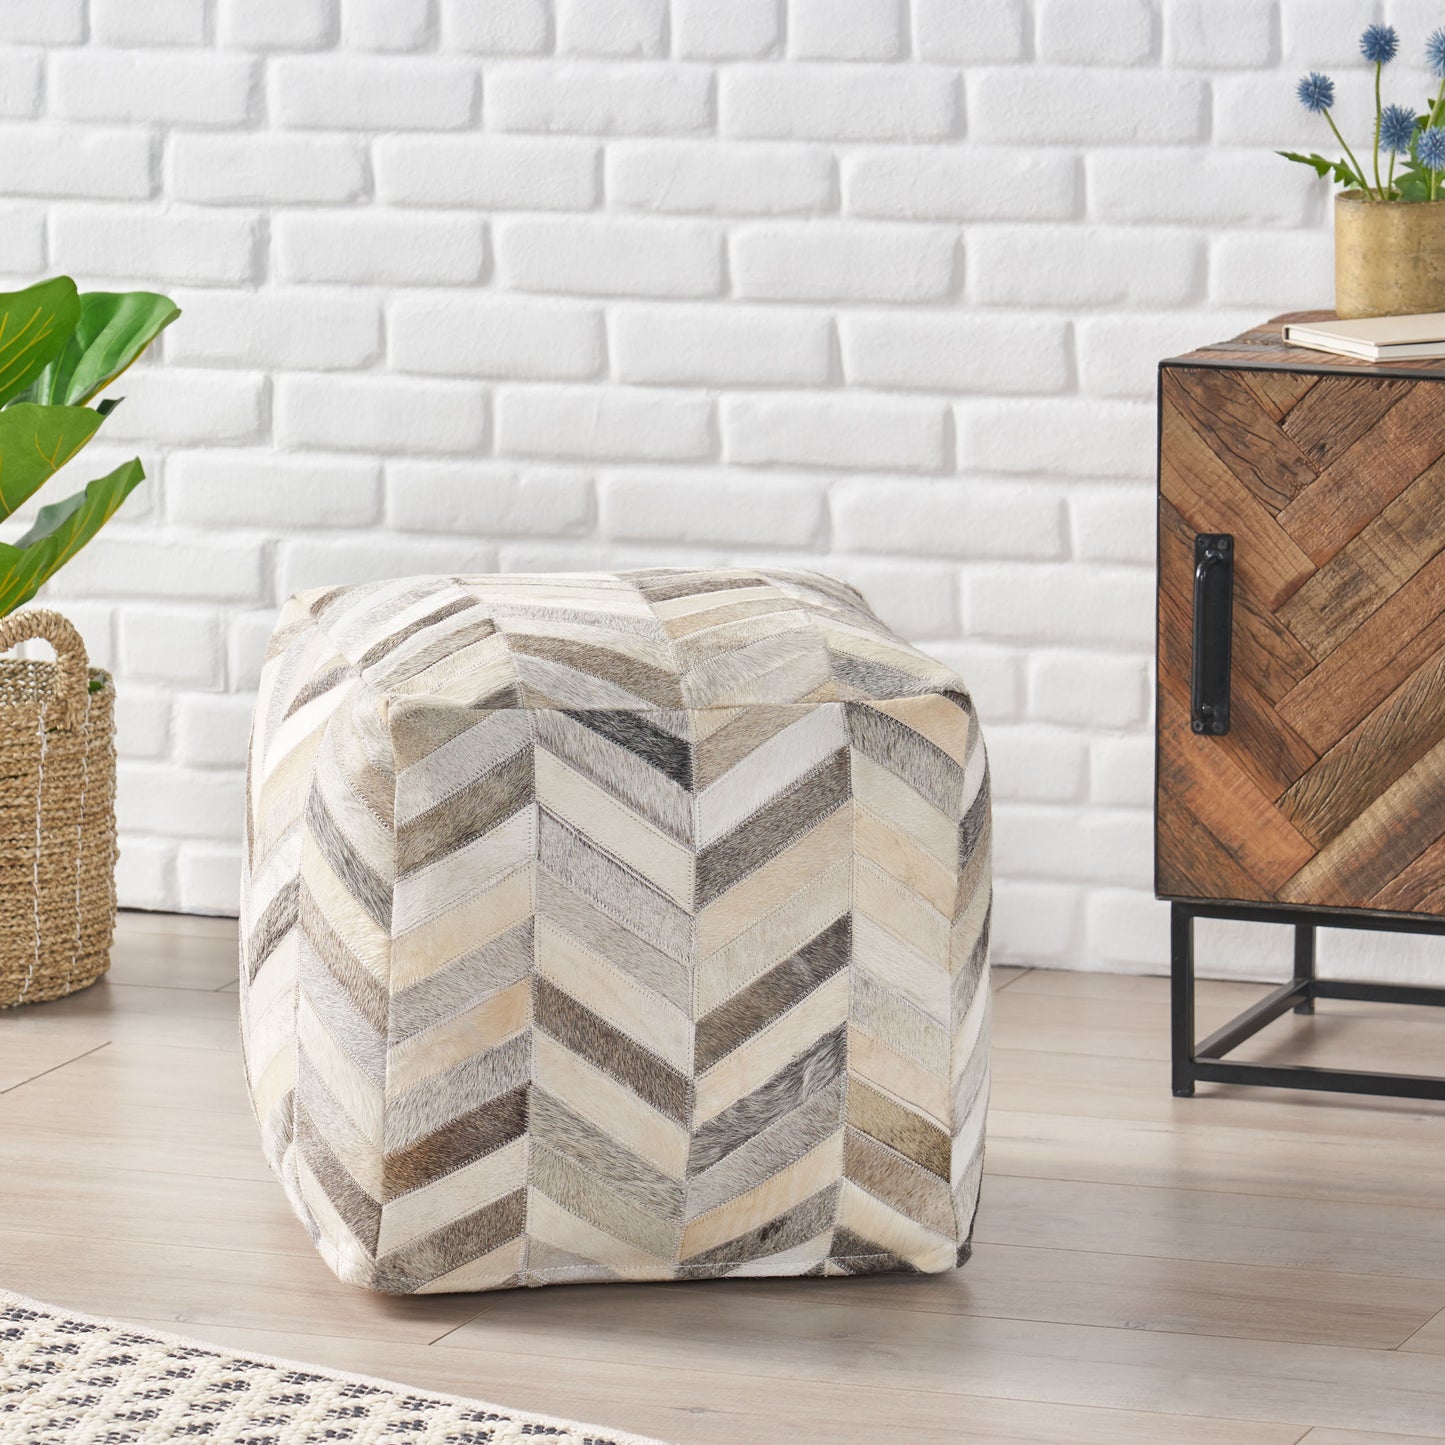 Weikel Handcrafted Boho Cowhide Pouf